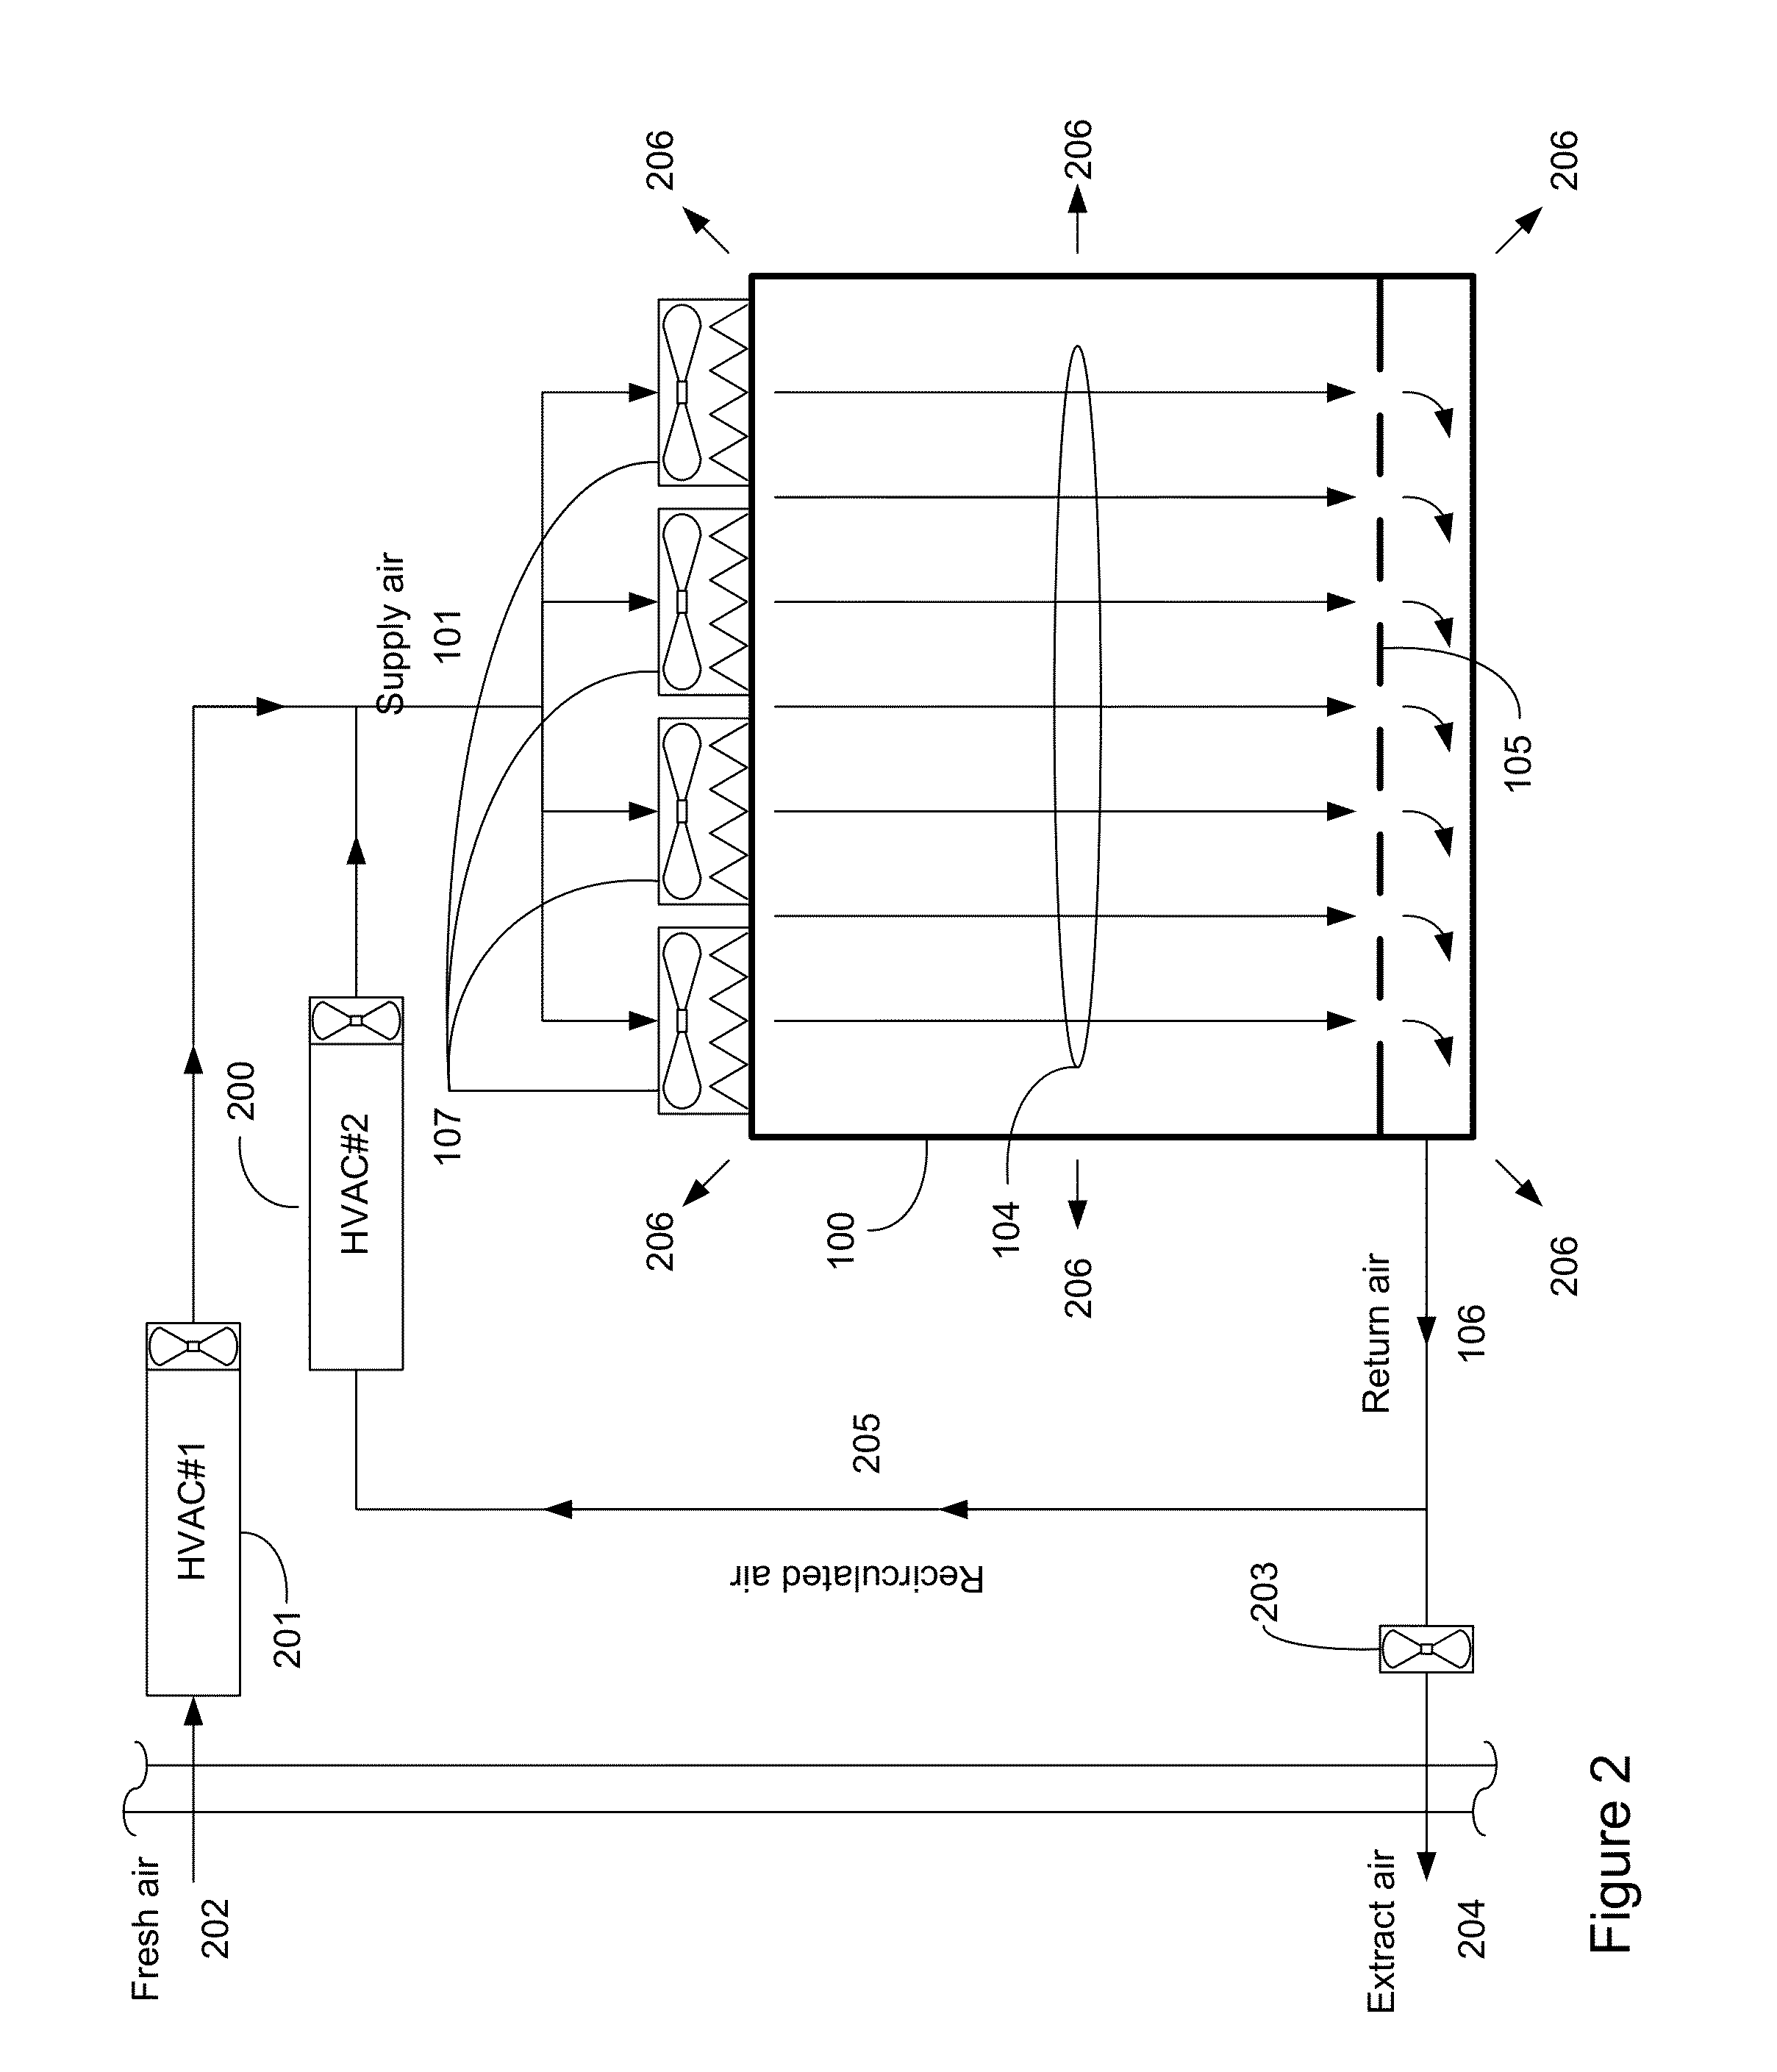 System for Managing a Cleanroom Environment